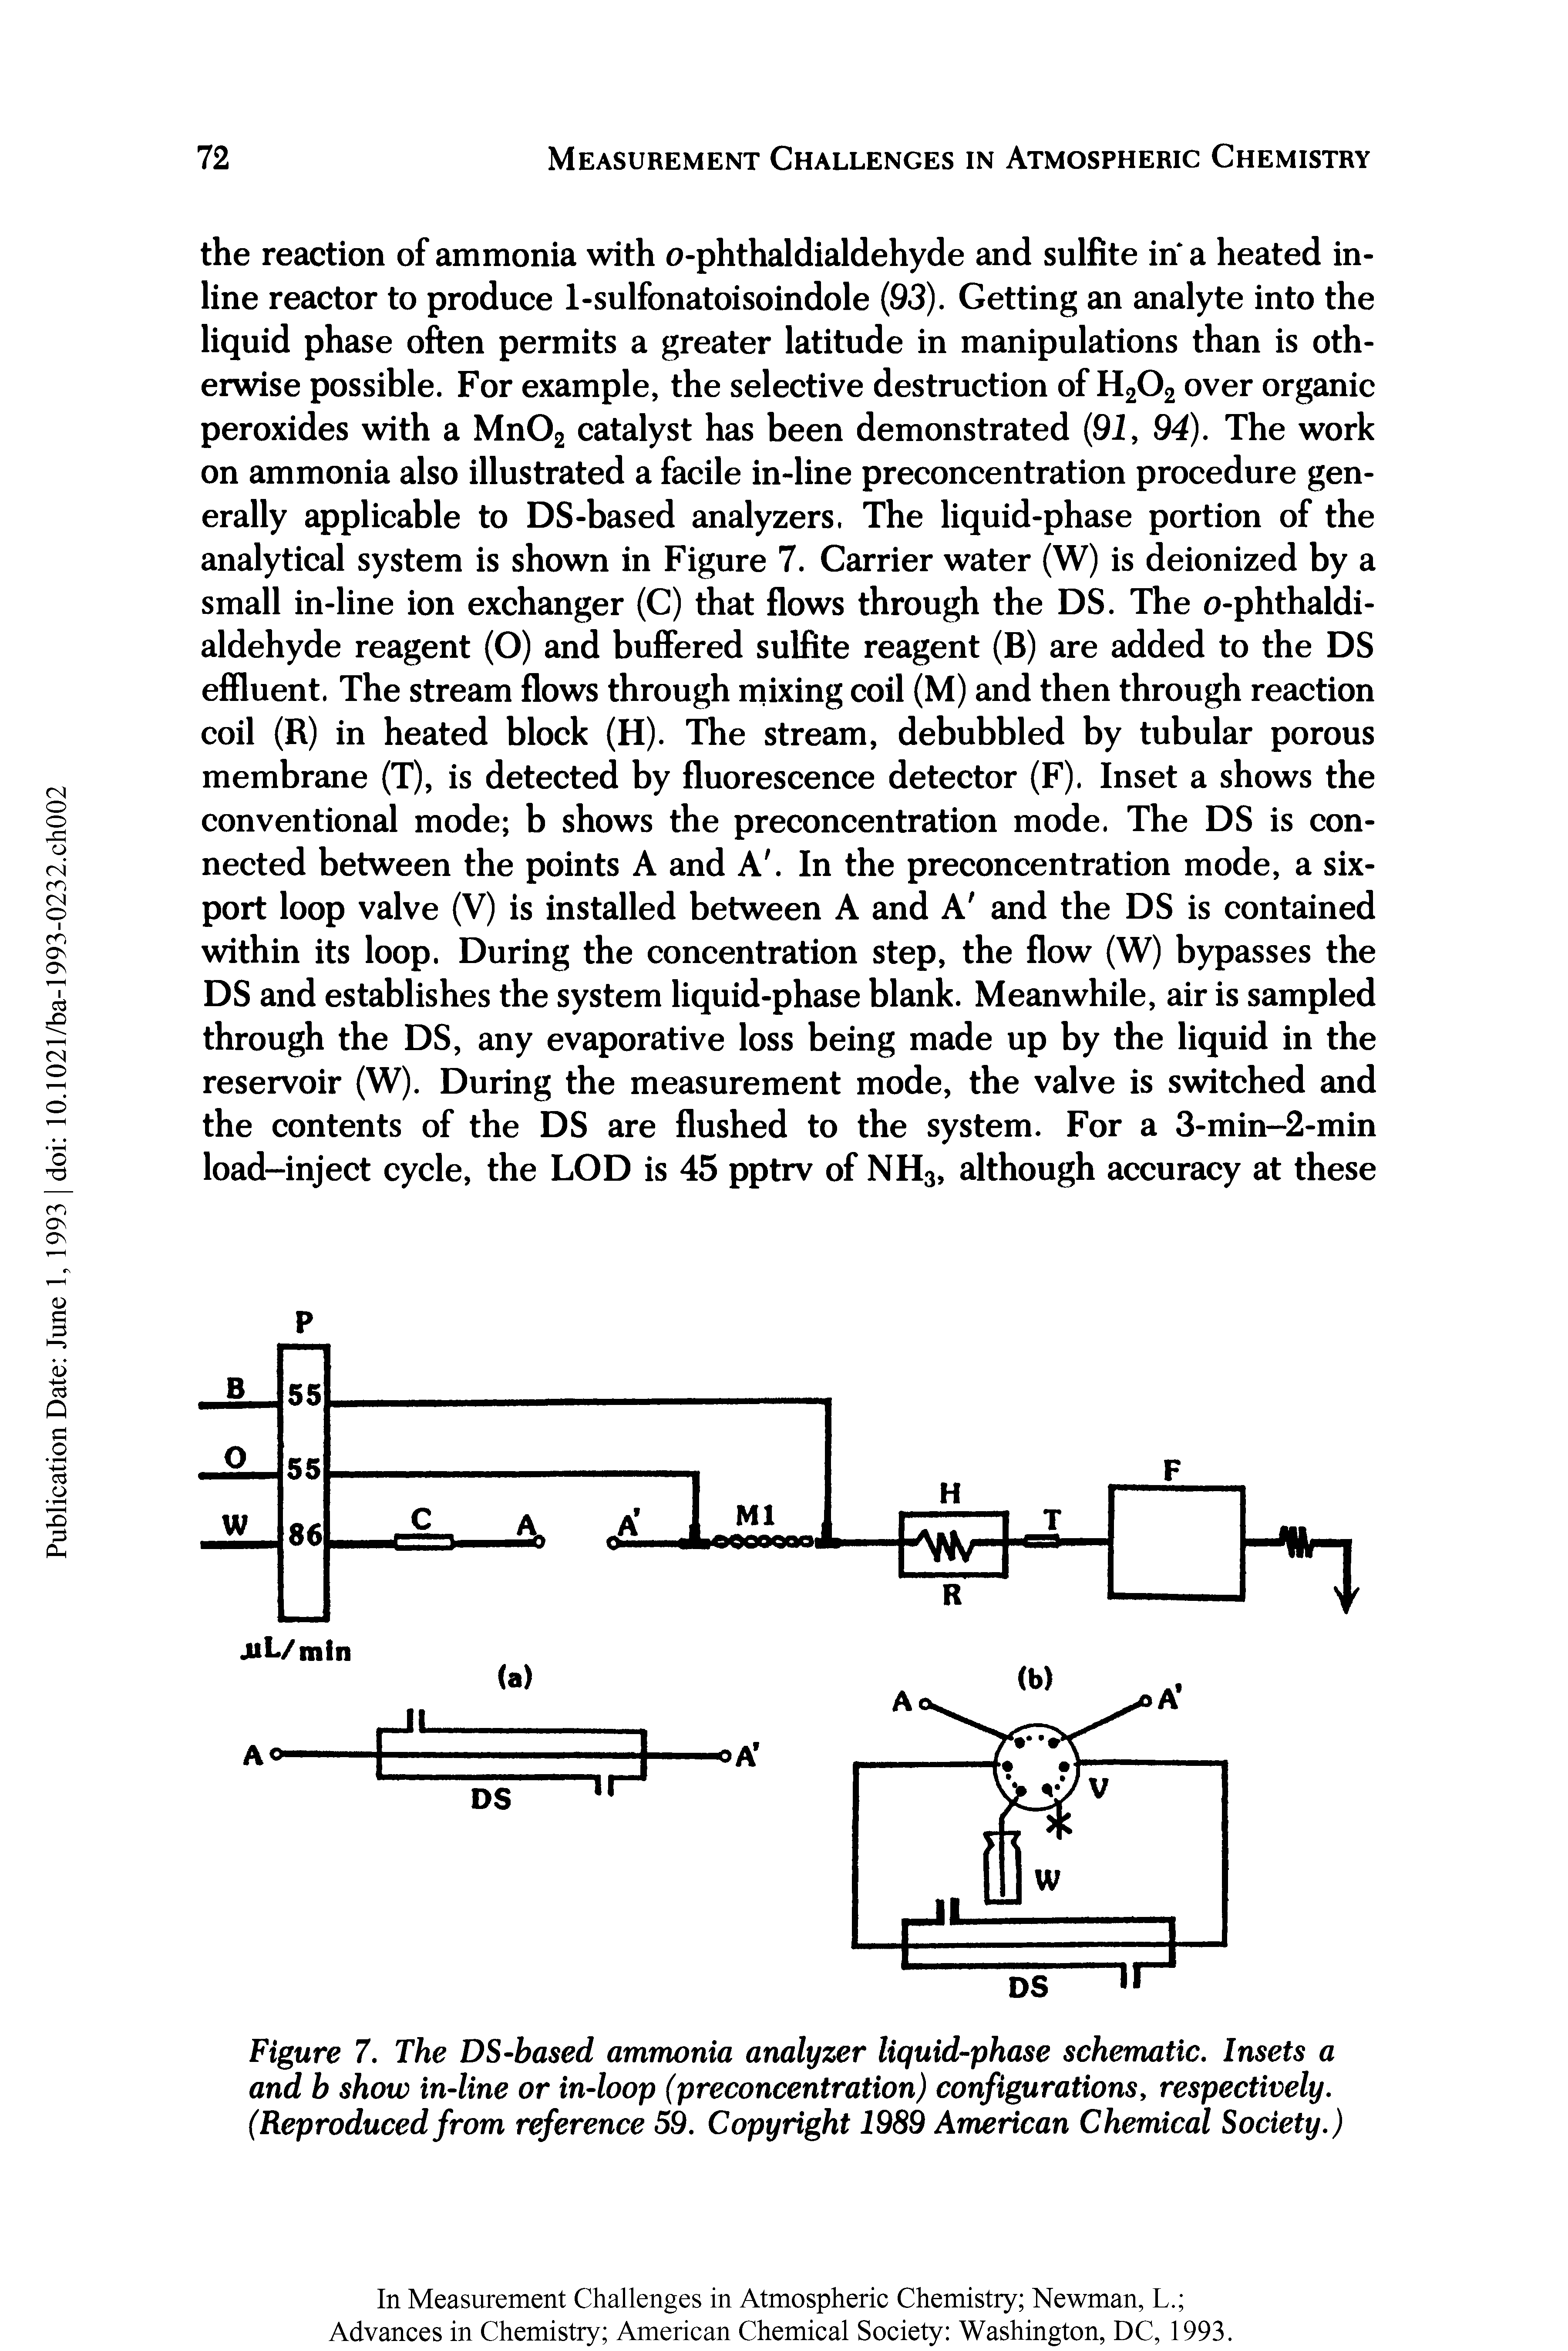 Figure 7. The DS-based ammonia analyzer liquid-phase schematic. Insets a and b show in-line or in-loop (preconcentration) configurations, respectively. (Reproduced from reference 59. Copyright 1989 American Chemical Society.)...